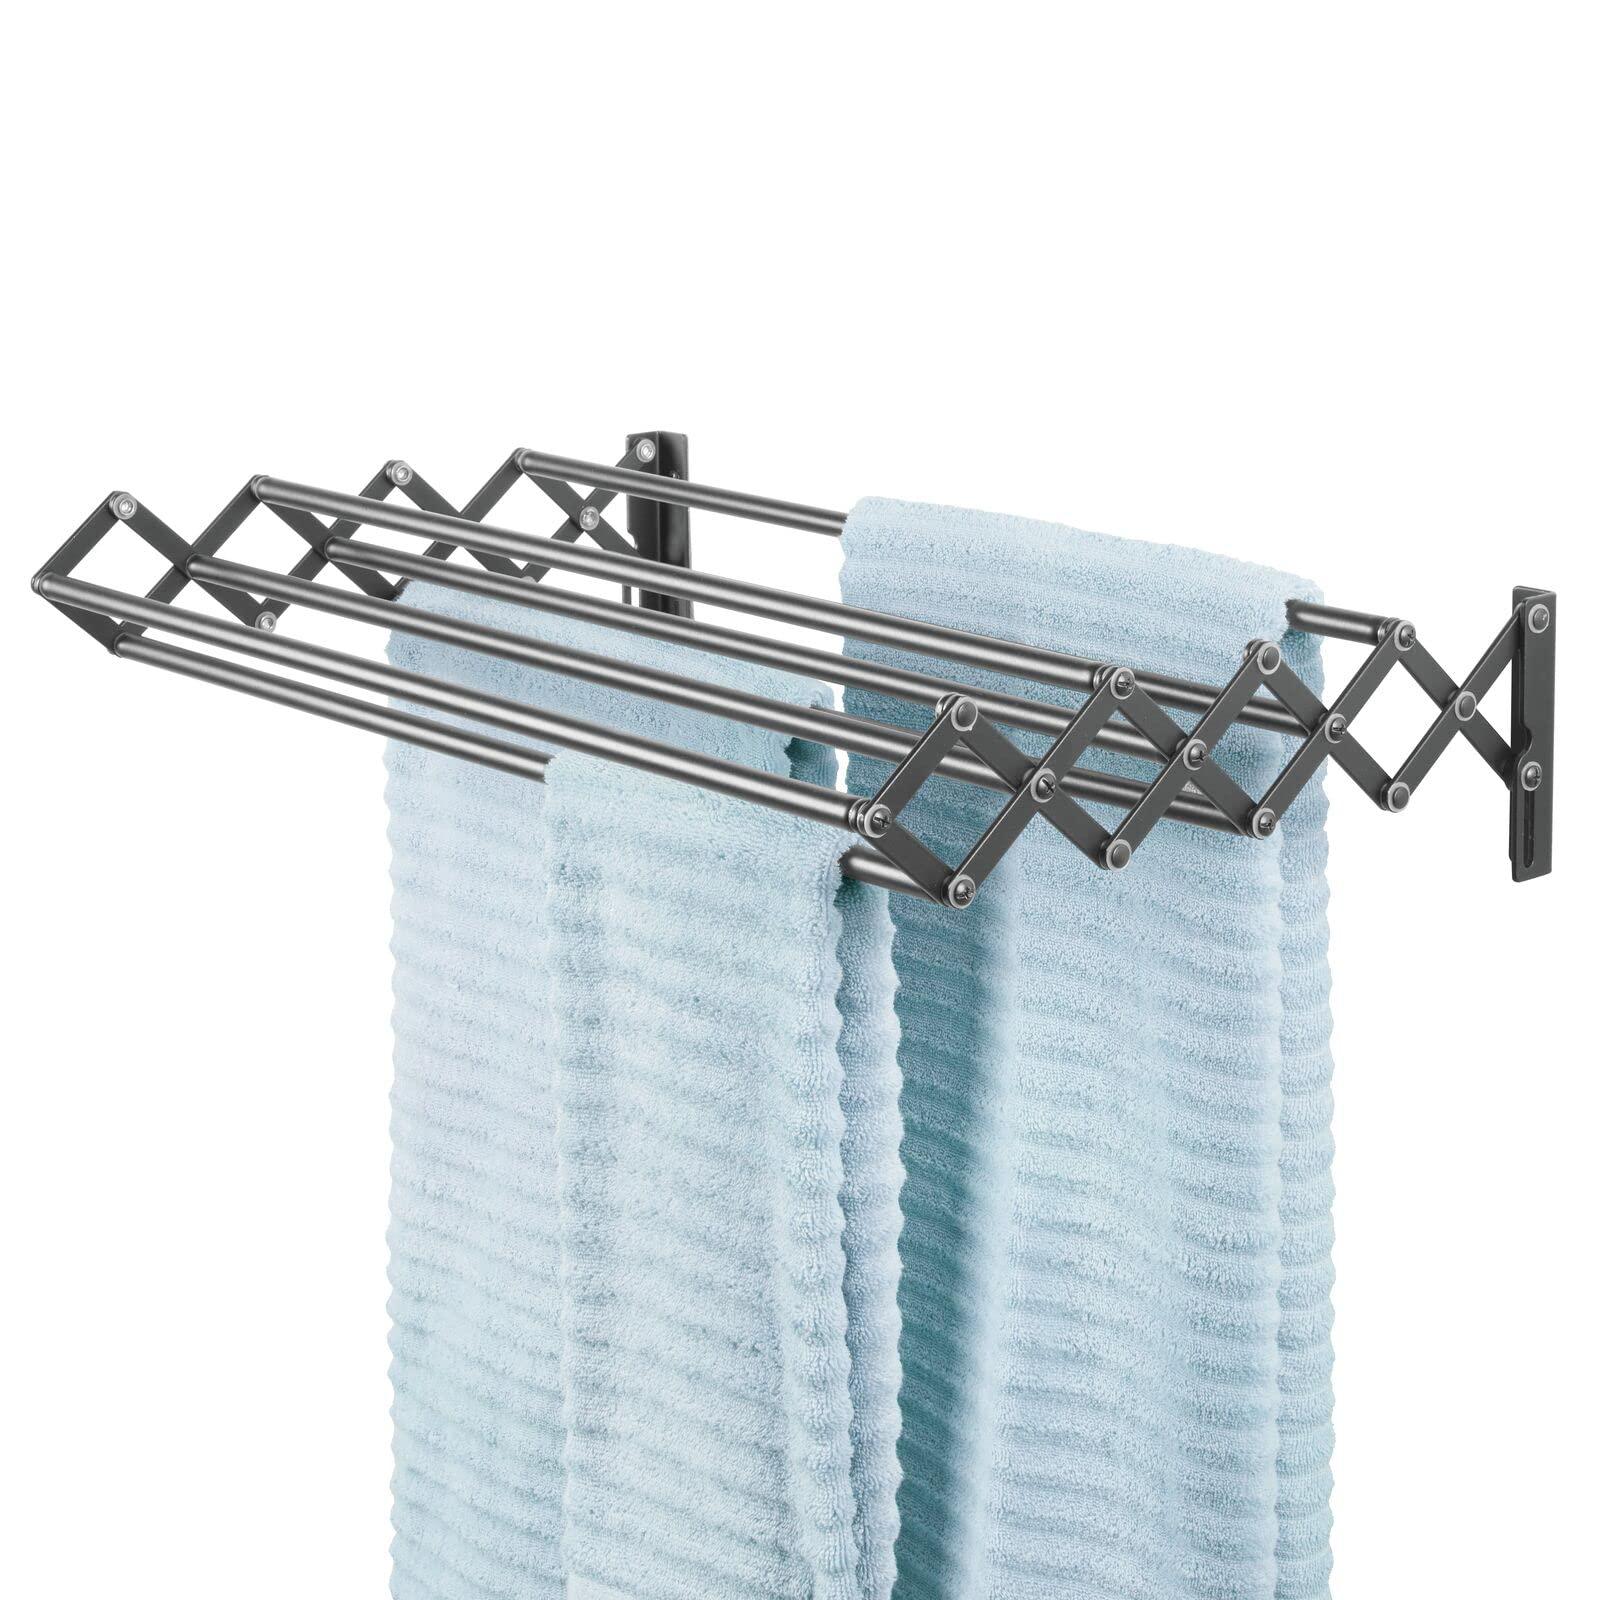 mdesign steel wall mount accordion expandable retractable clothes air drying rack - 8 bars for hanging garments - organizer f